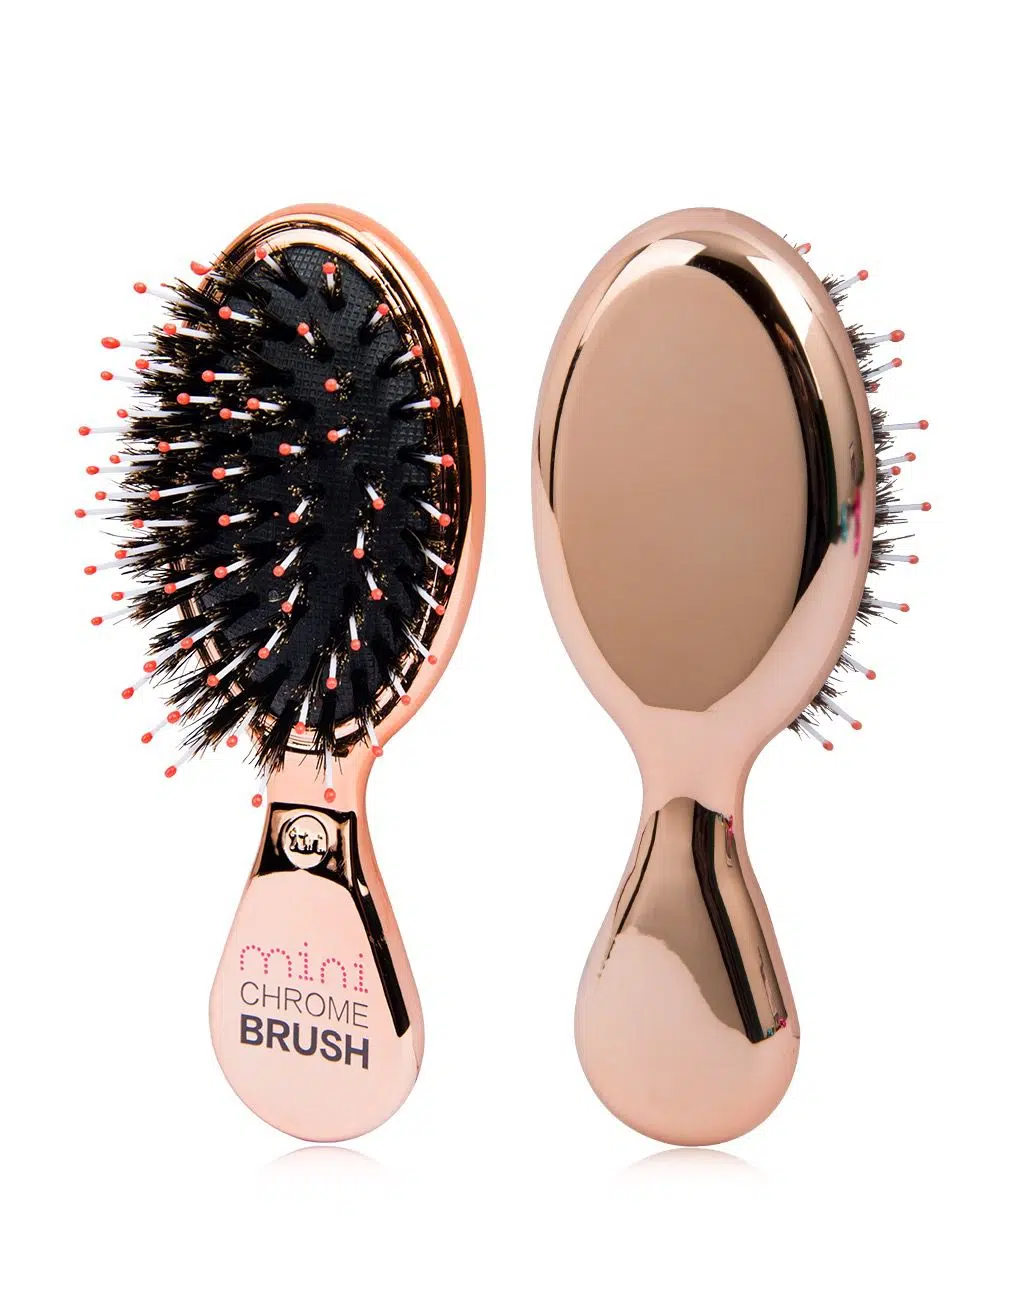 Compact hair brush Styling tool for hair.